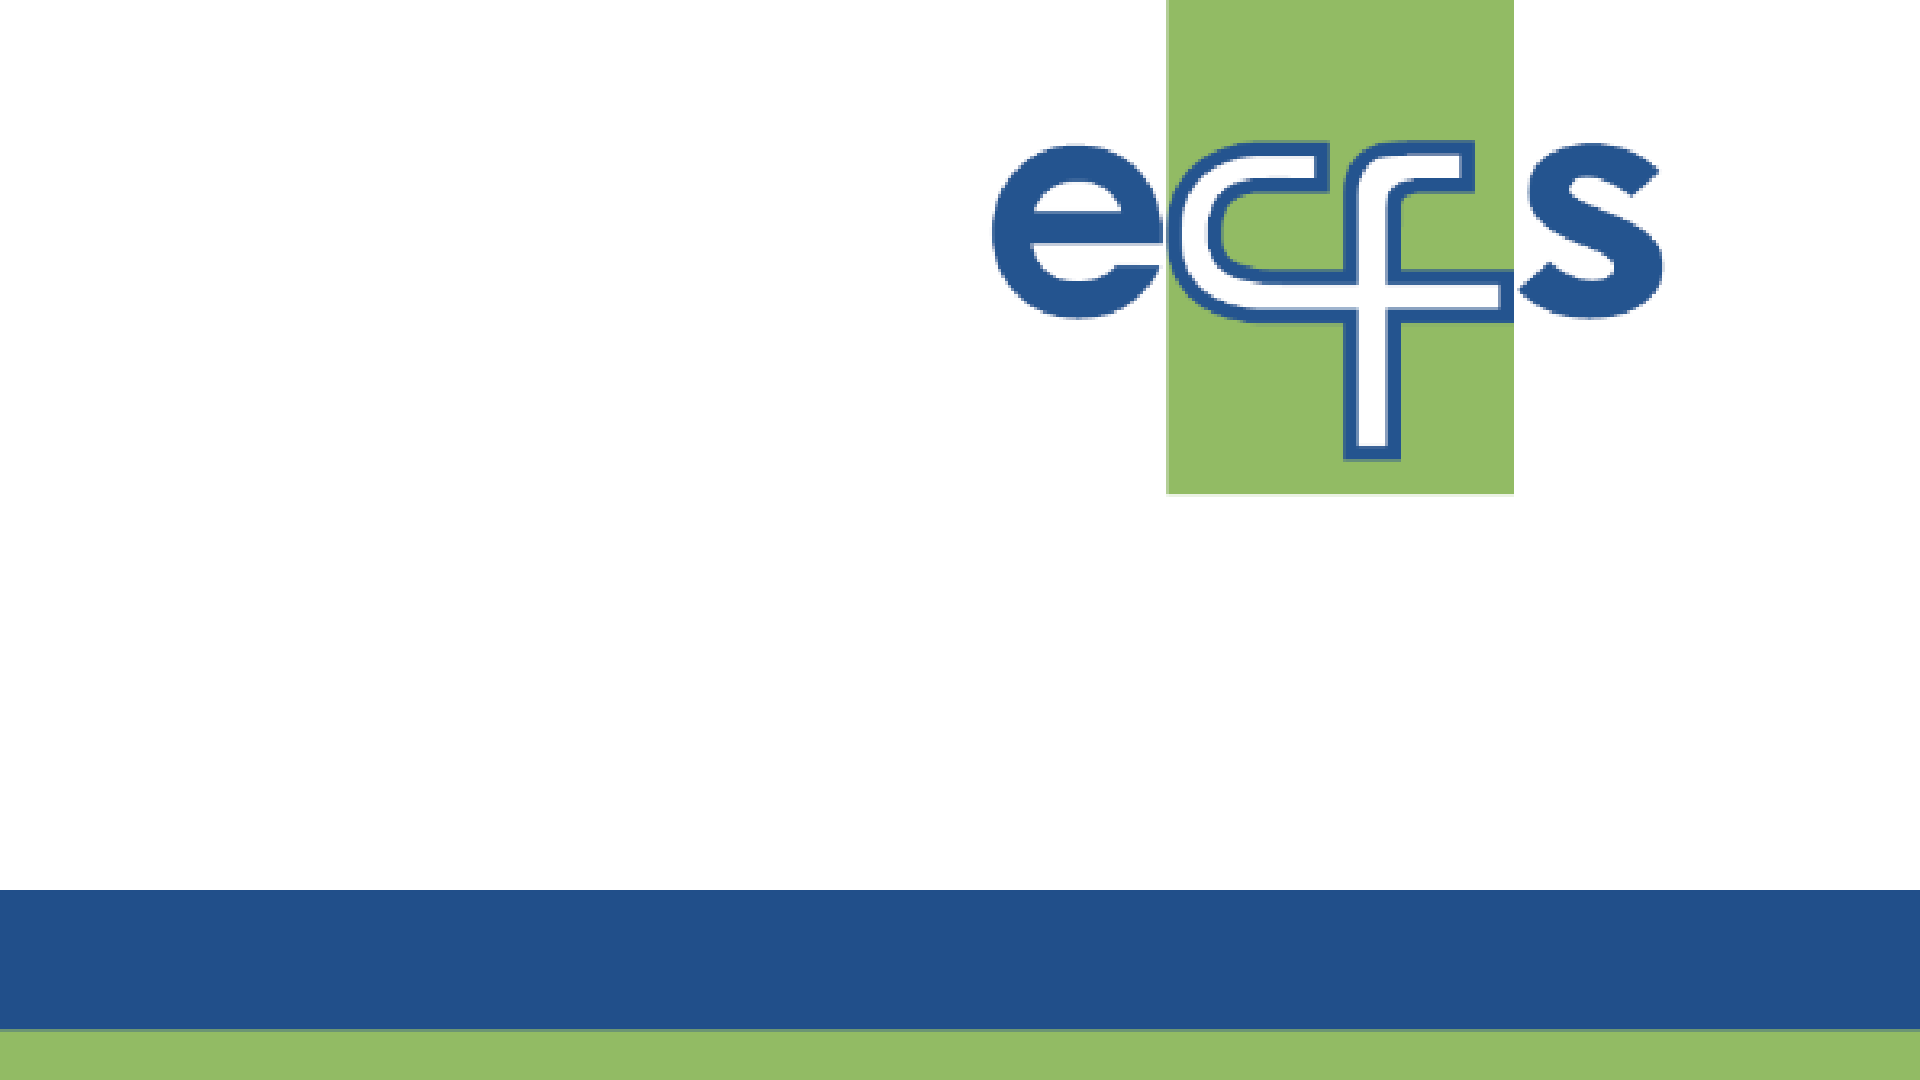 46th European Cystic Fibrosis Conference (ECFS) 2023